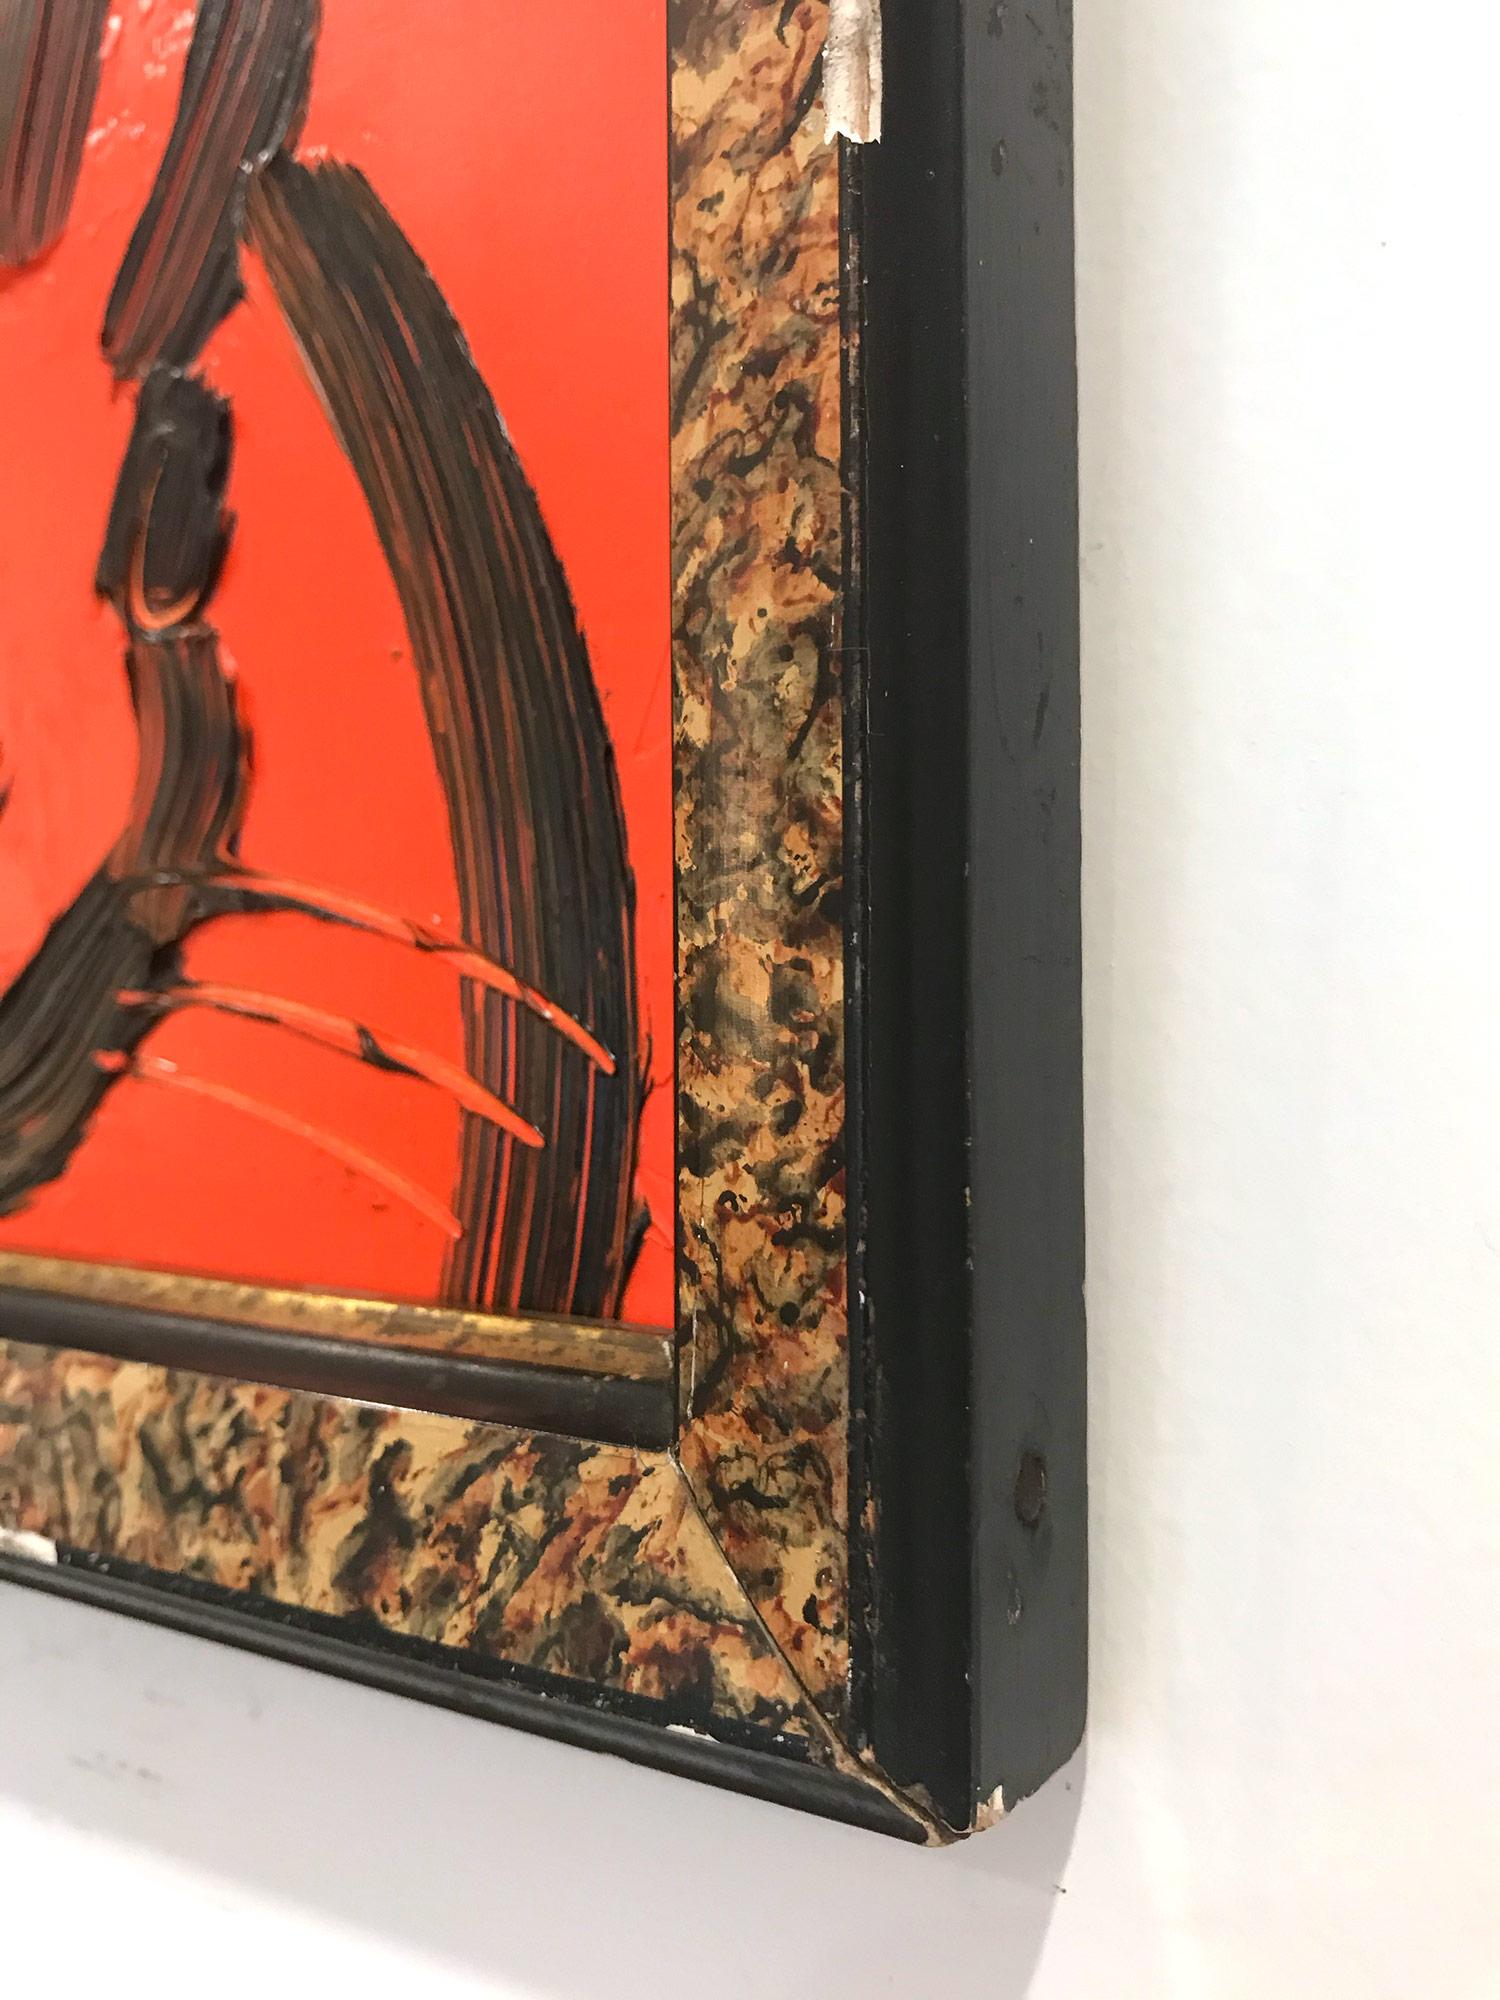 A wonderful composition of one of Slonem's most iconic subjects, Bunnies. This piece depicts a gestural figure of a black bunny on a Scarlet Red background with thick use of paint. It is housed in a wonderful antique frame. Inspired by nature and a